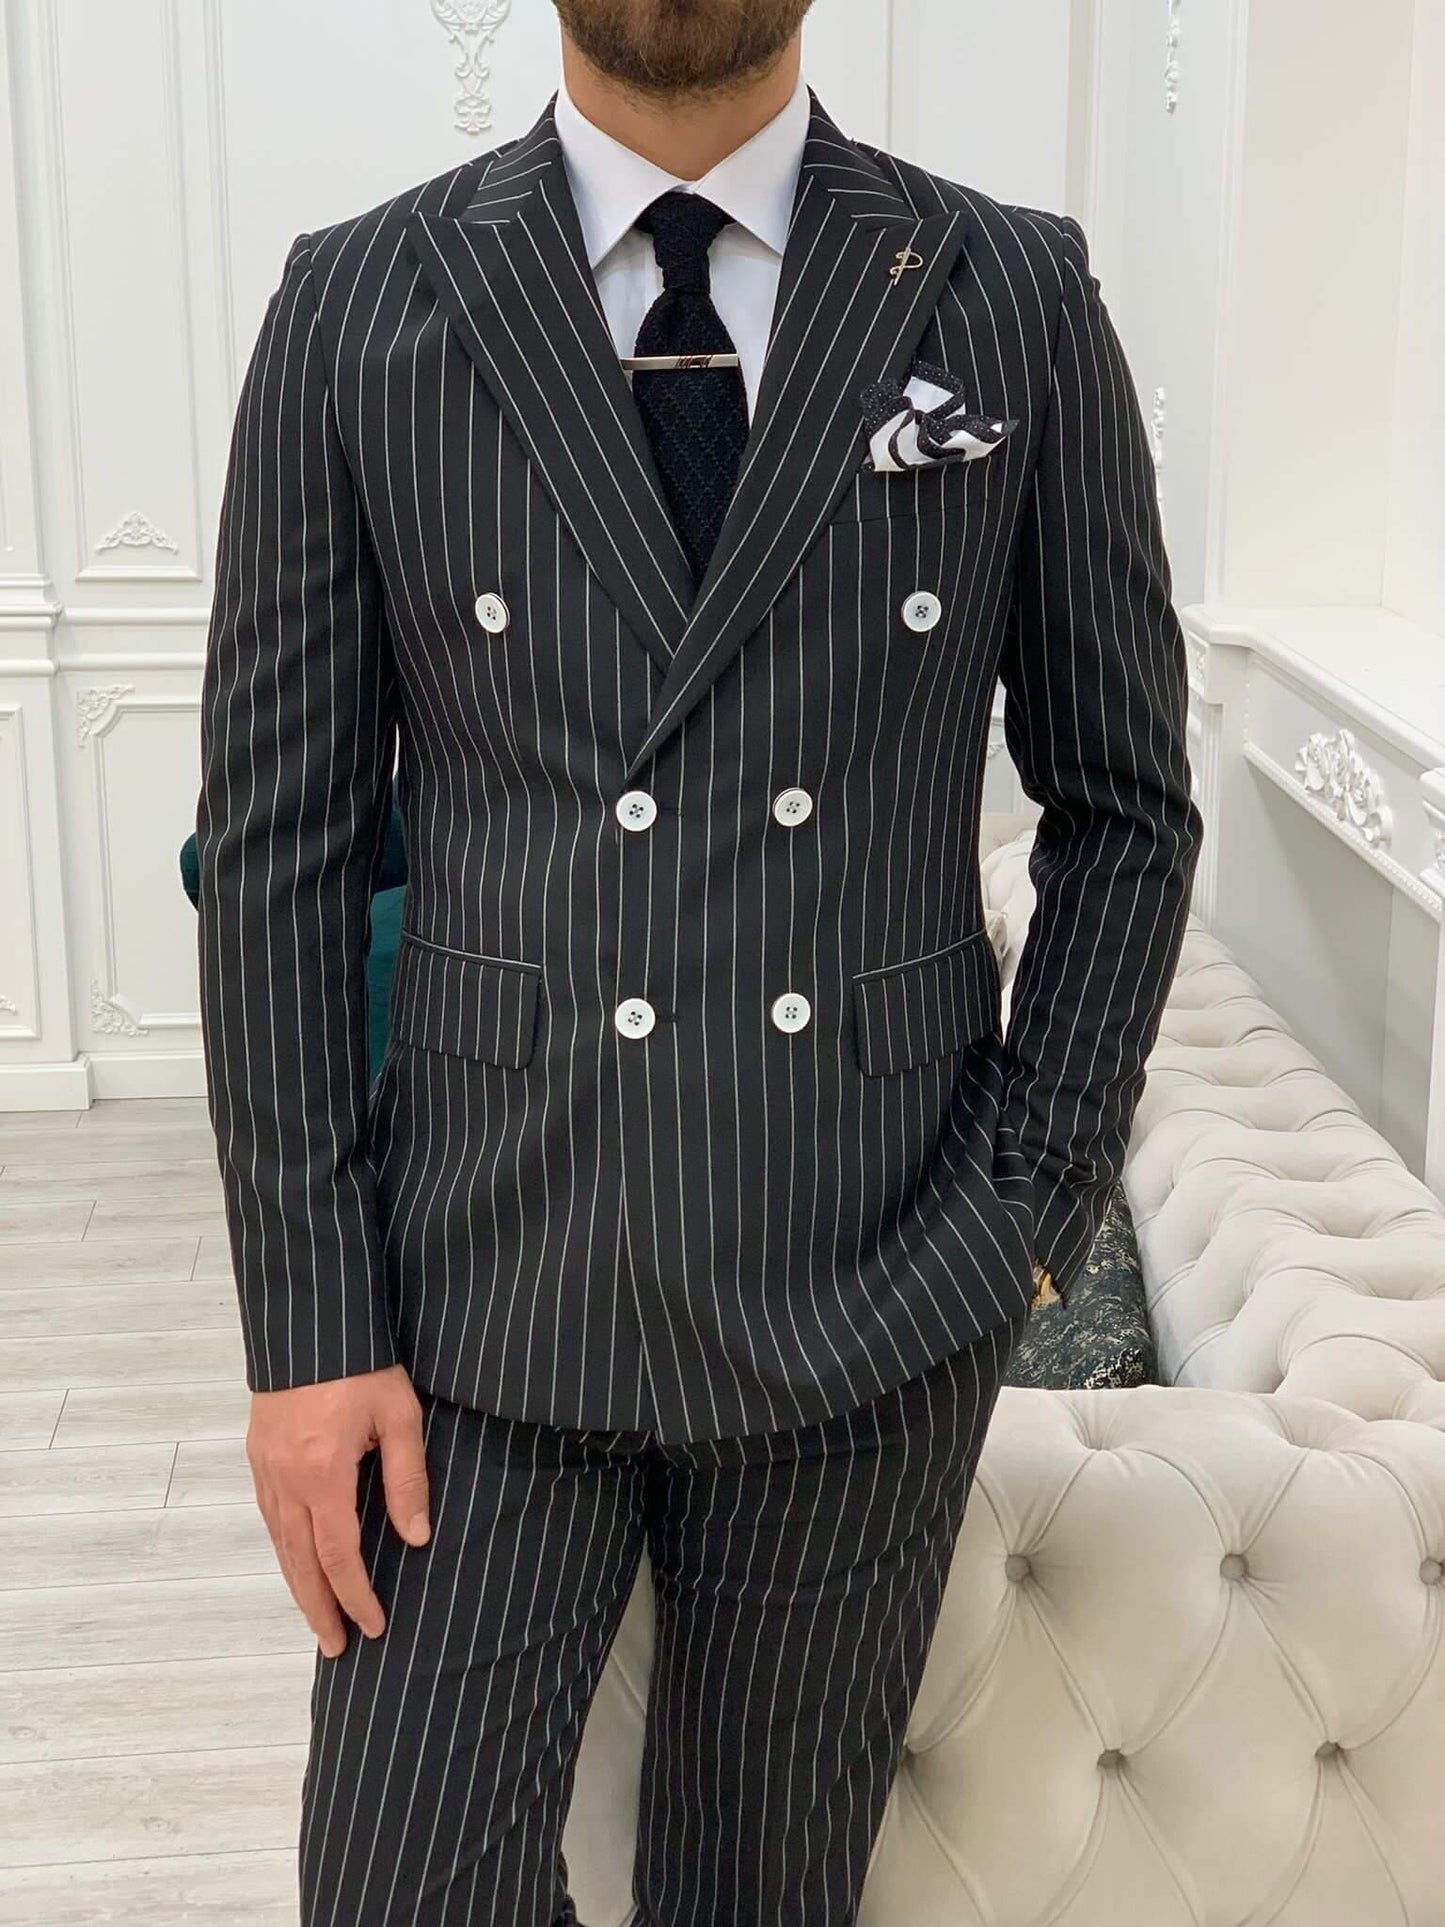 Pinstripe Black Double Breasted Suit